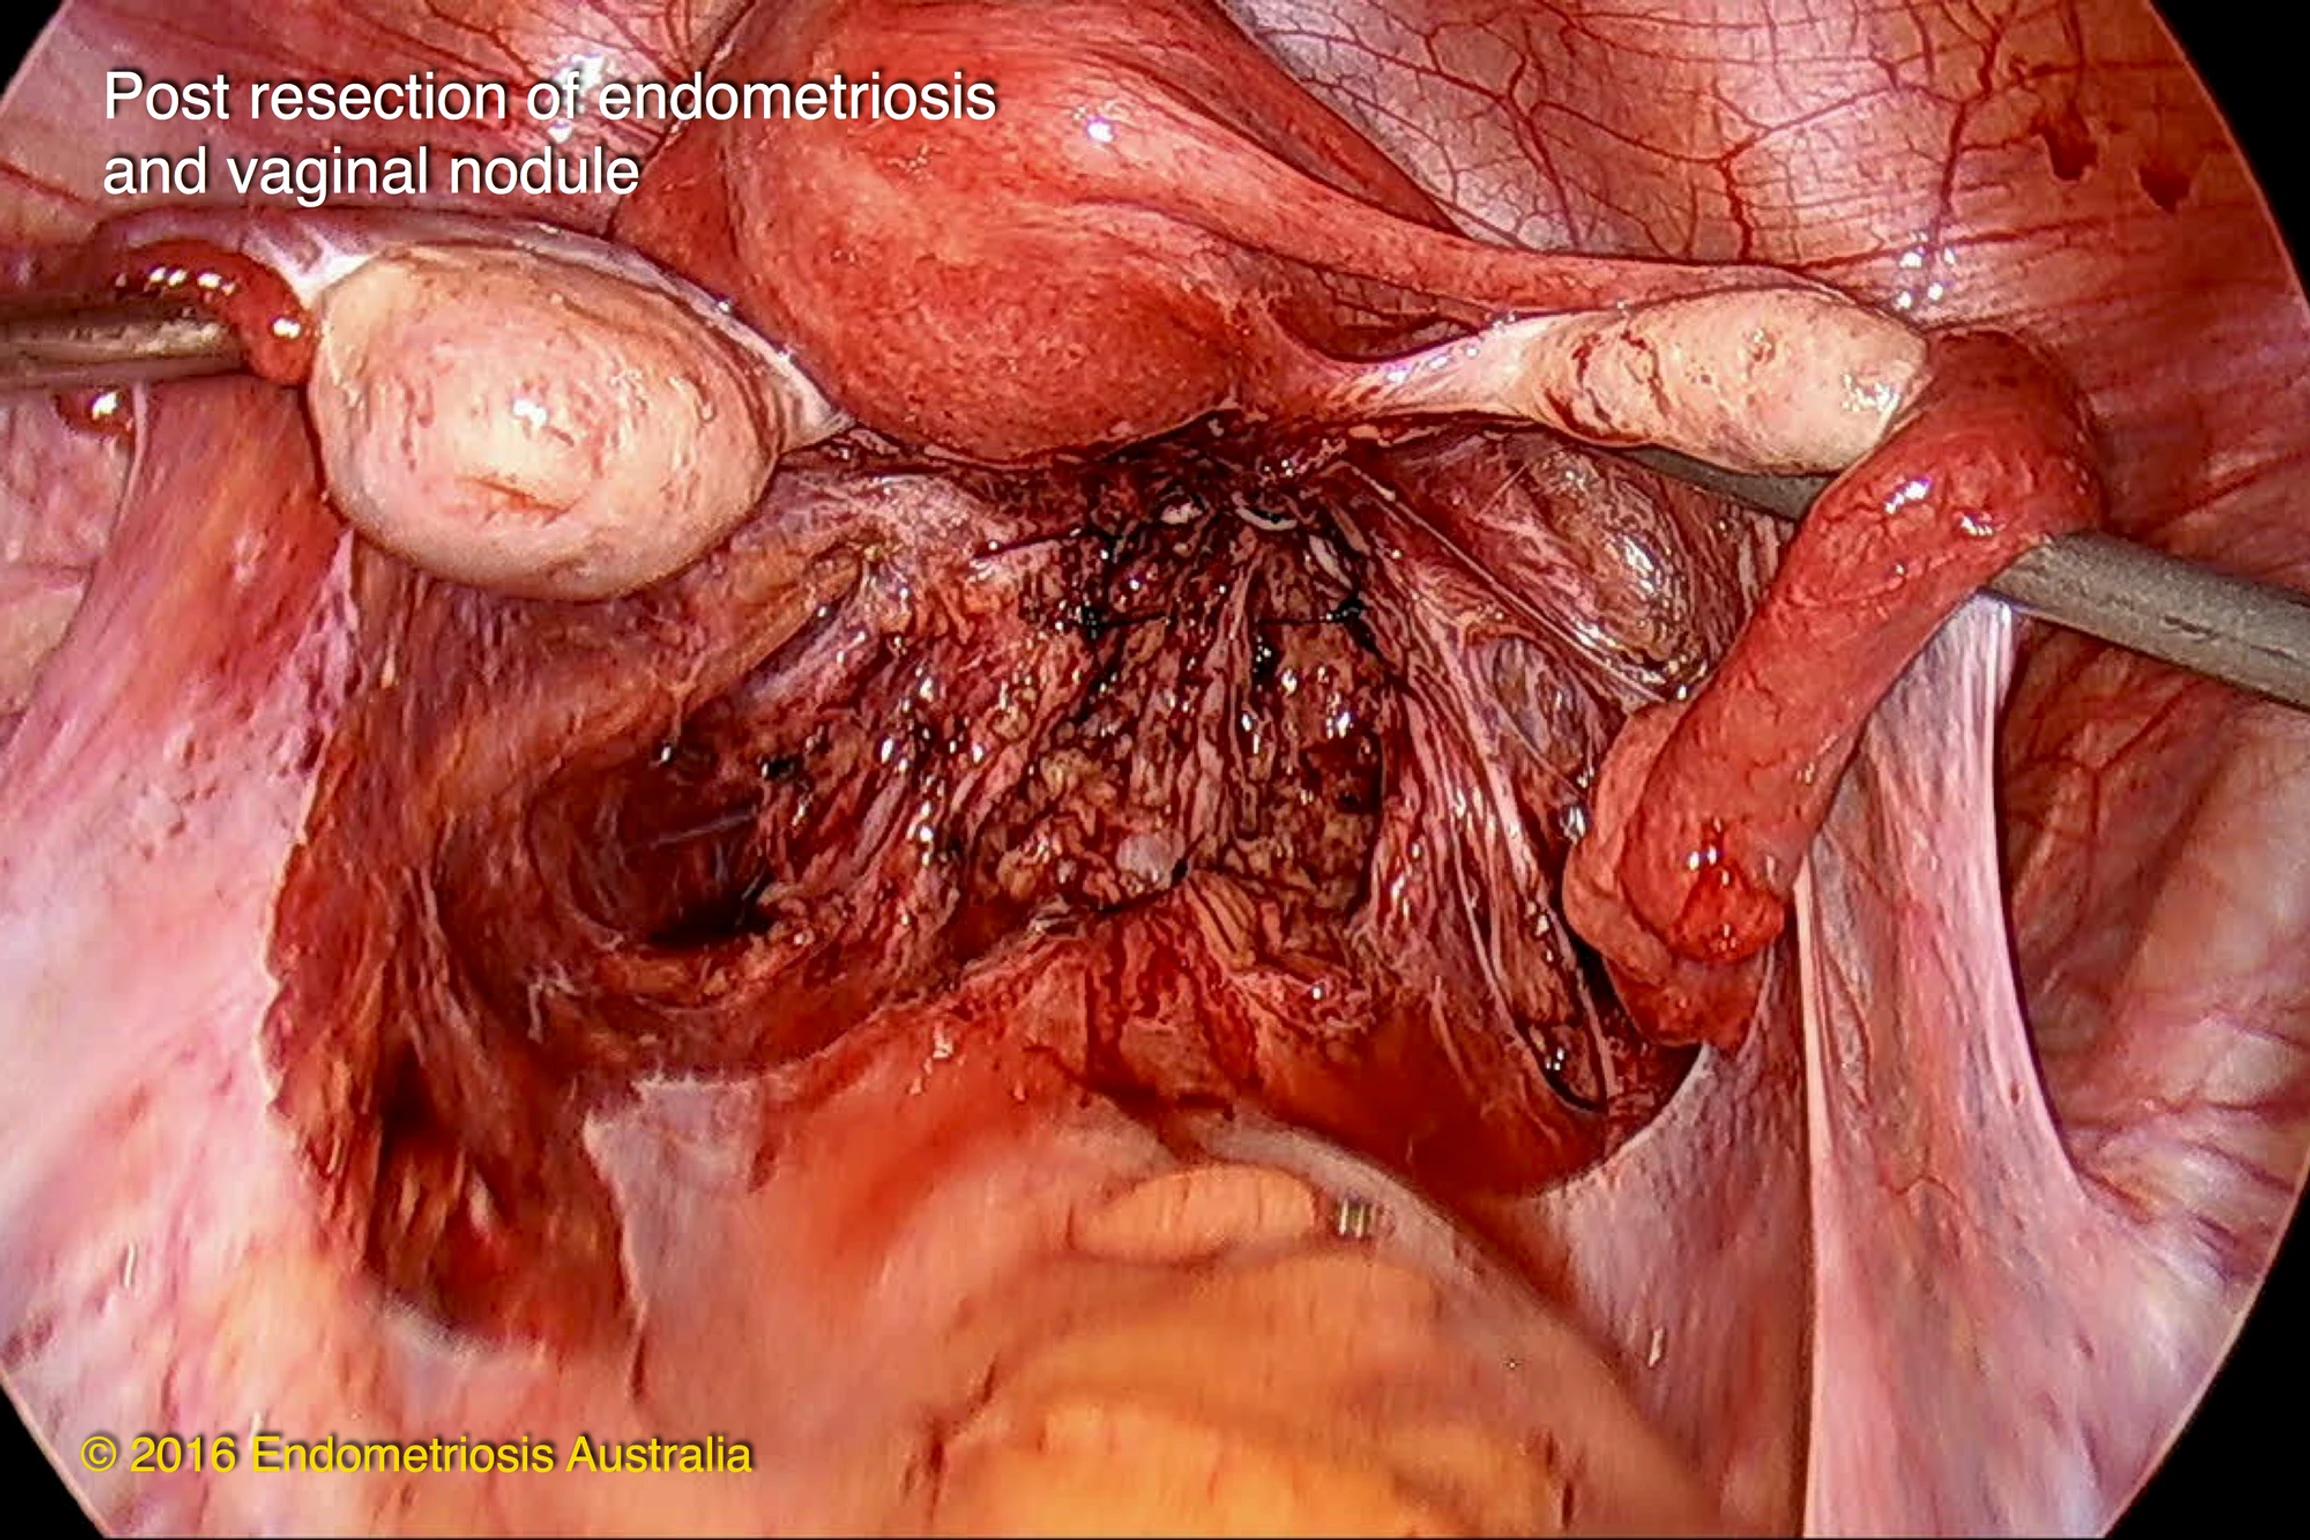 Post resection of endometriosis and vaginal nodule